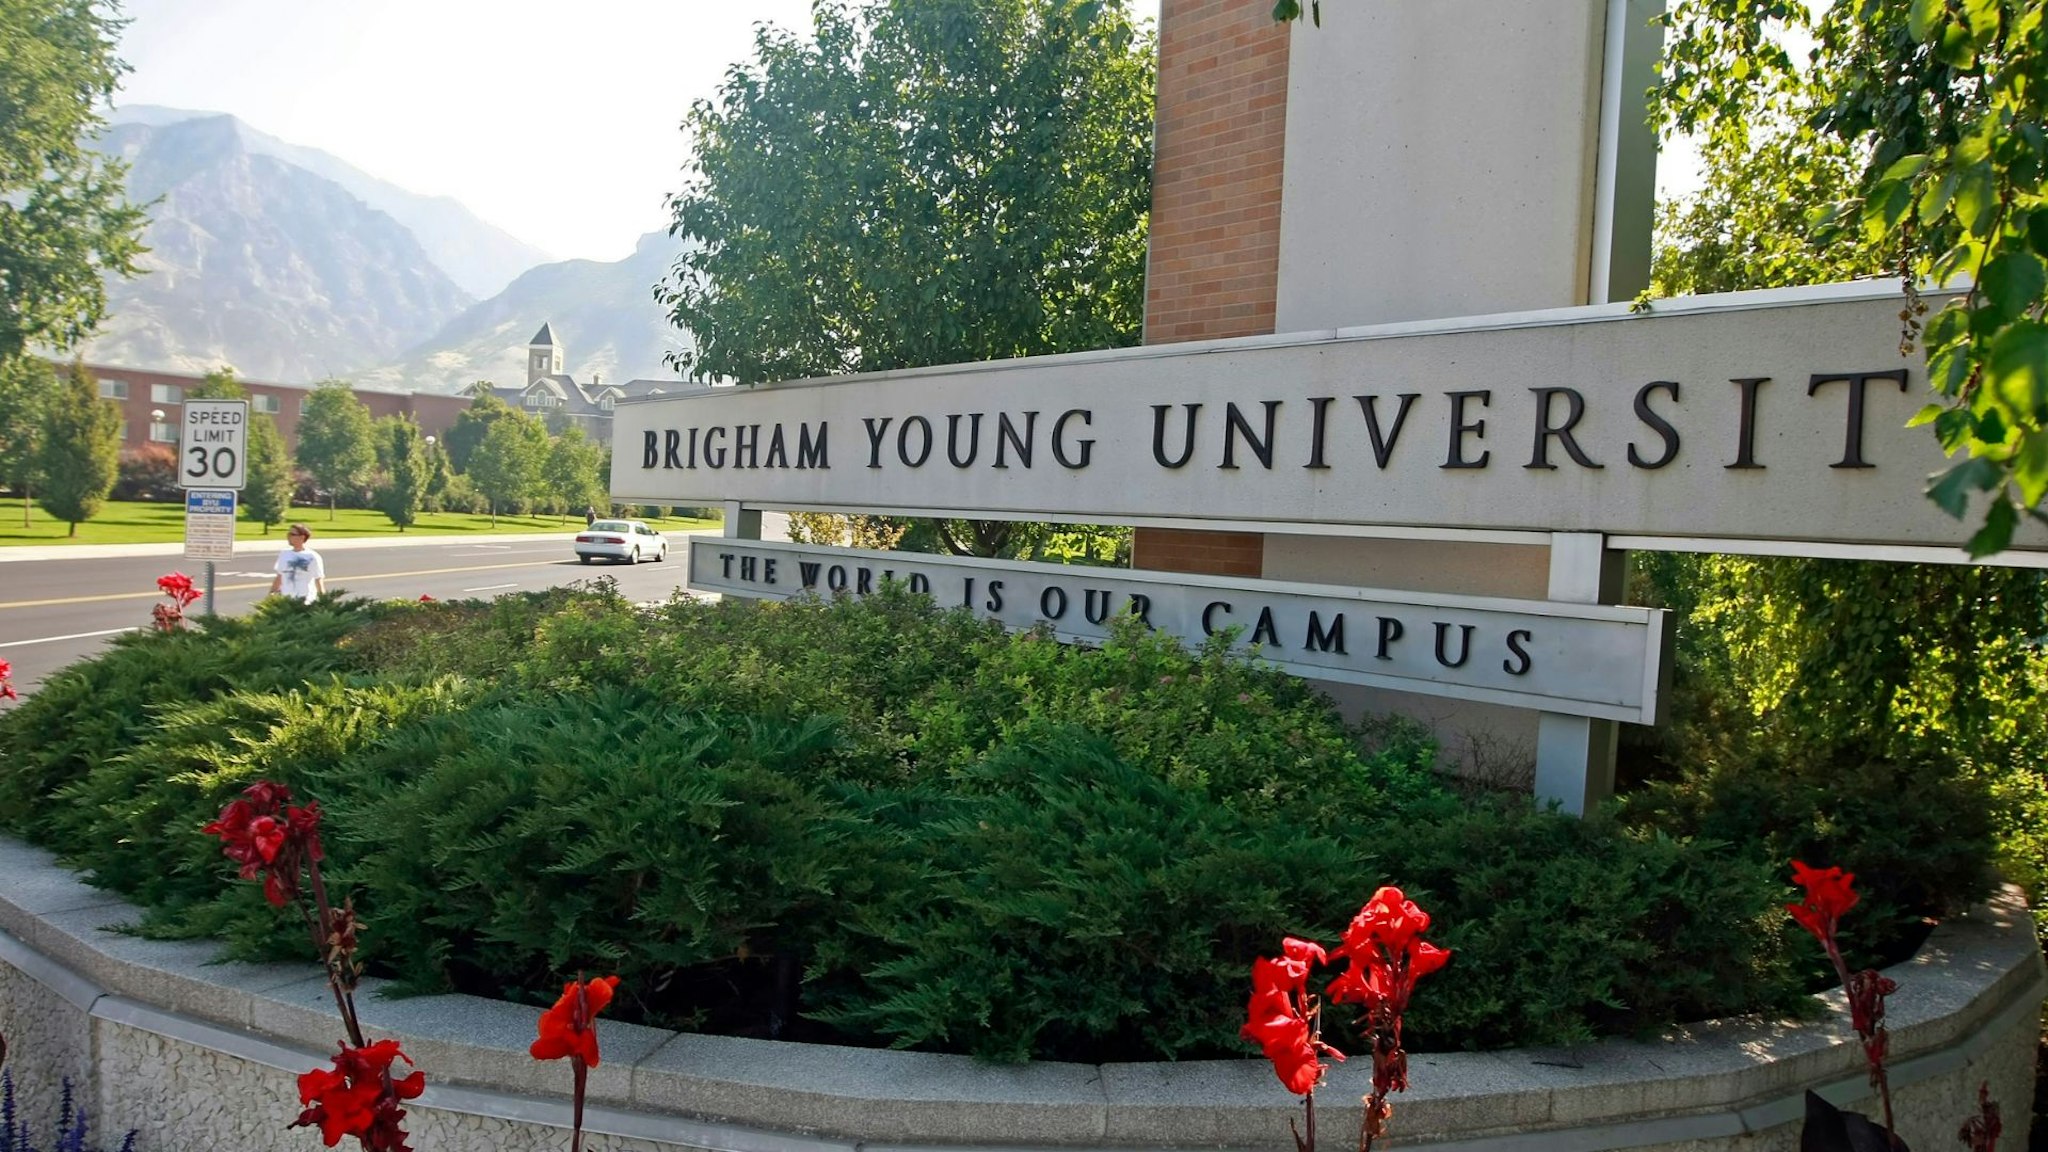 UNITED STATES - SEPTEMBER 01: A sign stands at the main entrance to the campus of Brigham Young University in Provo, Utah, U.S., on Tuesday, Sept. 1, 2009.